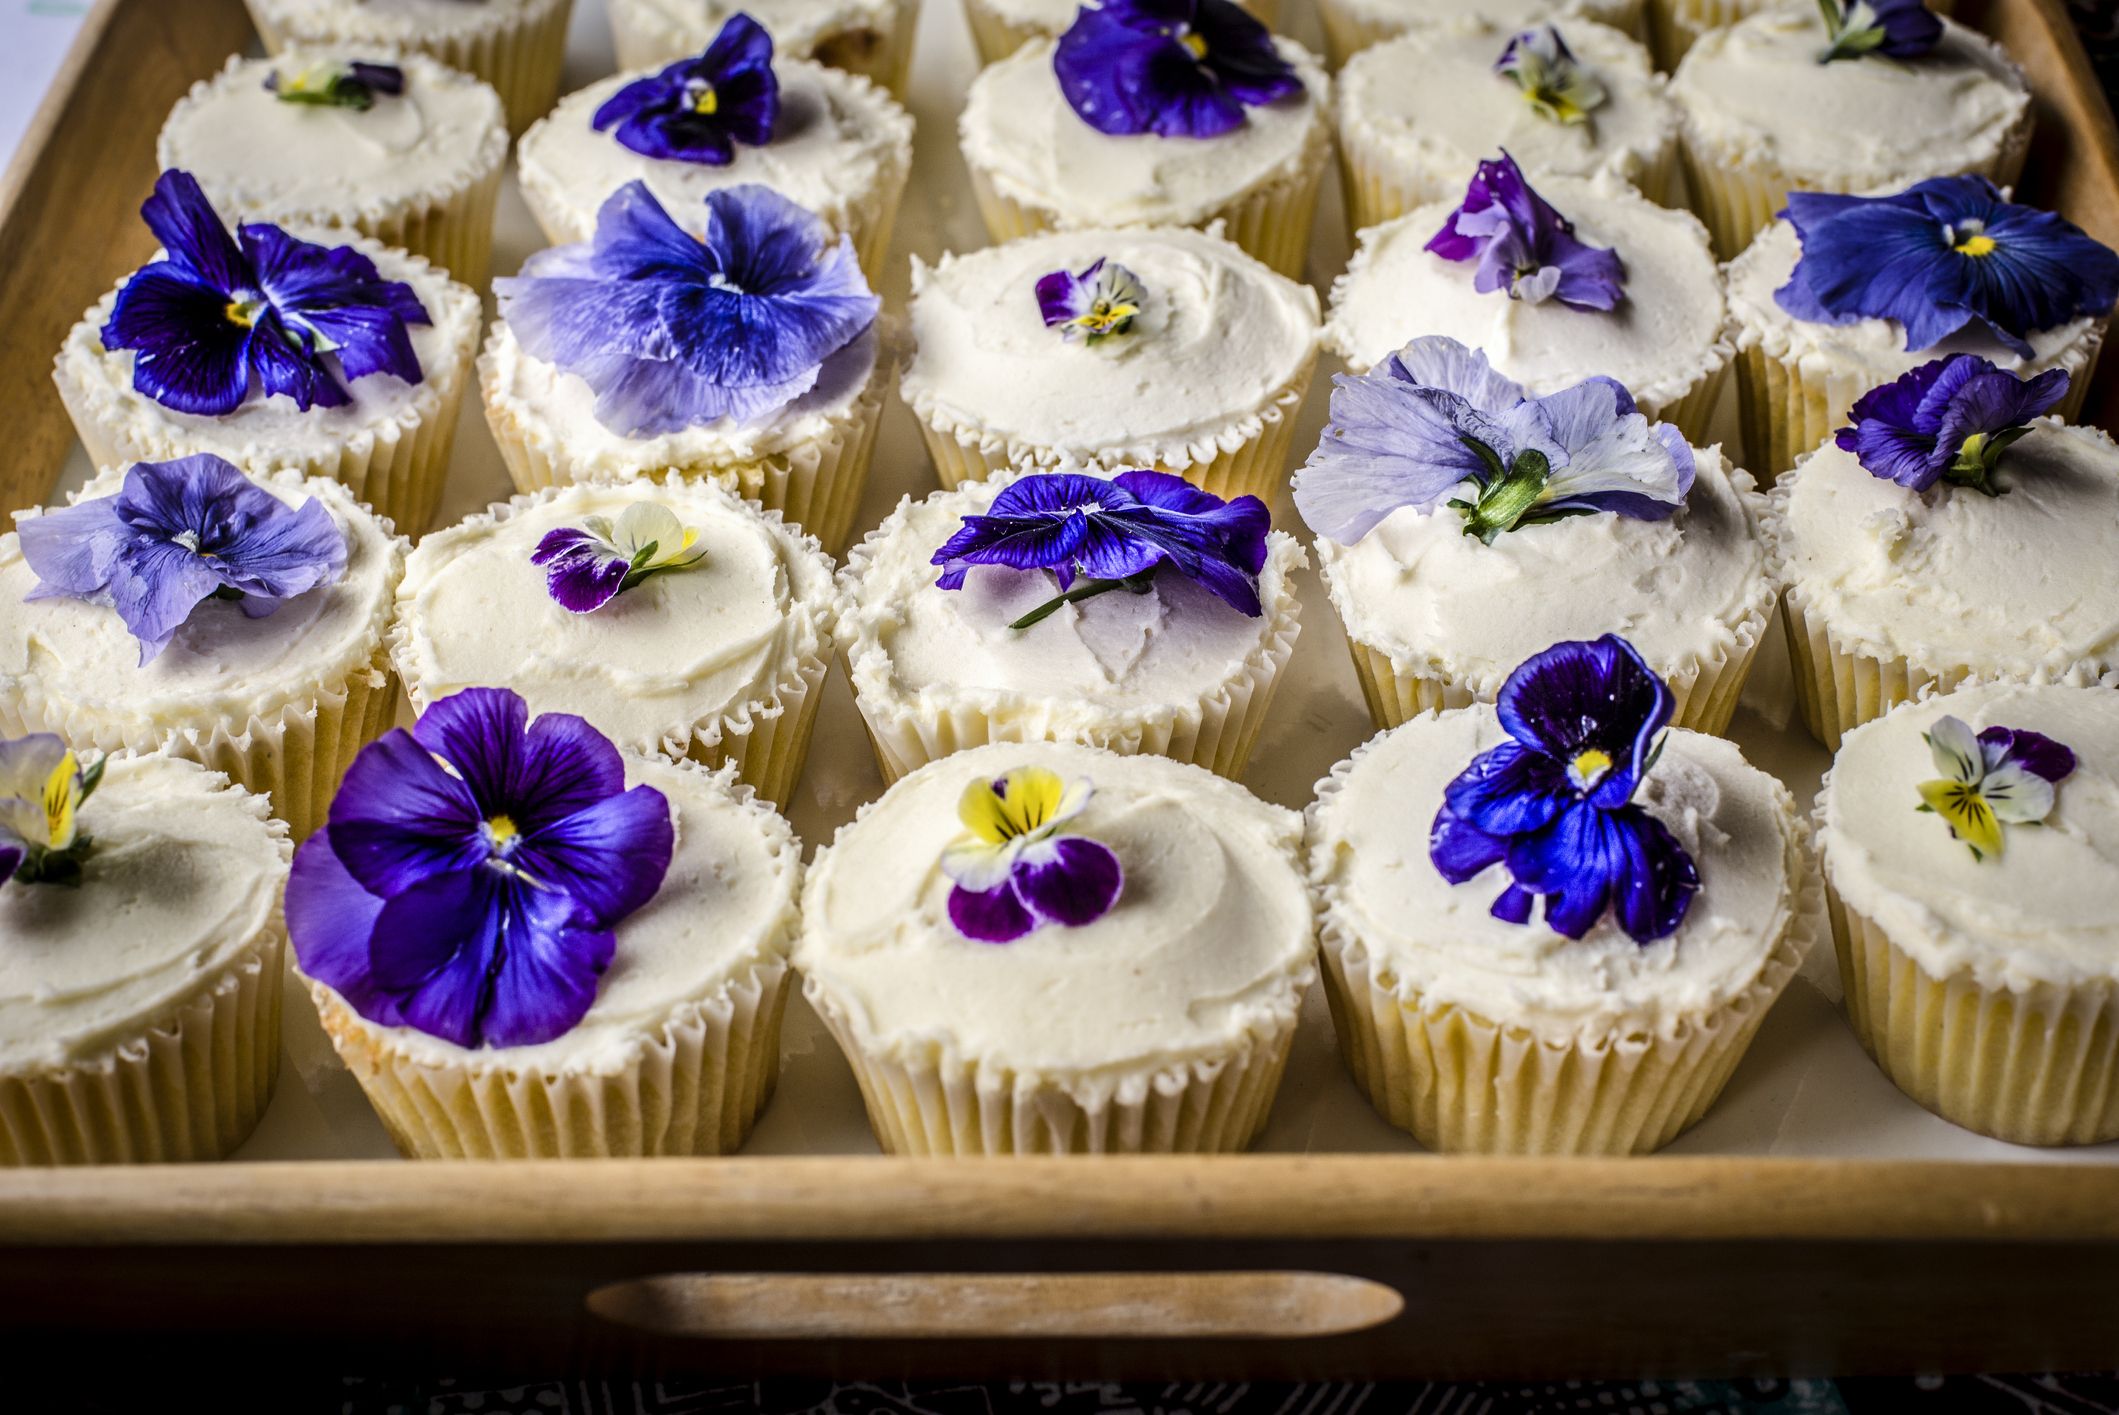 6 Ways to use Edible Flowers - Easy Recipe Ideas